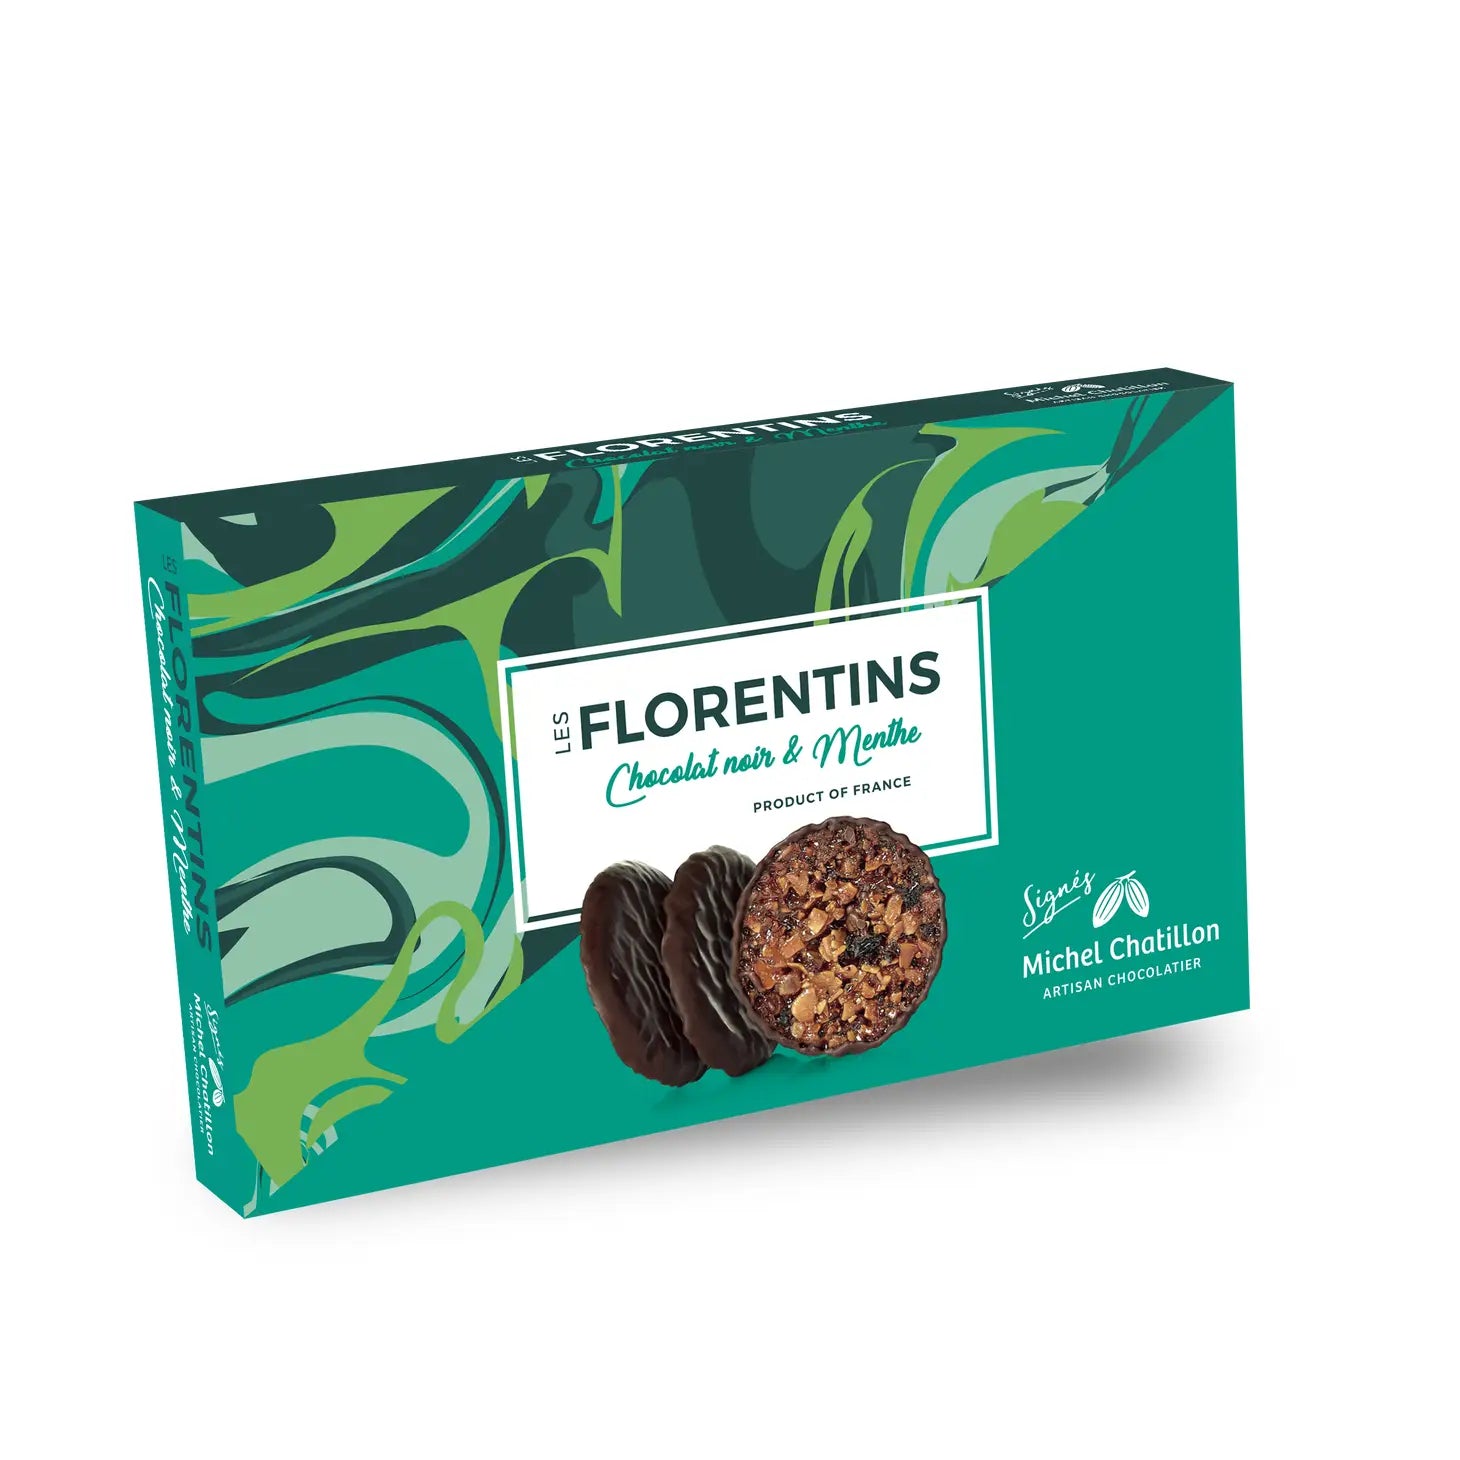 Mint Chocolate French Florentins